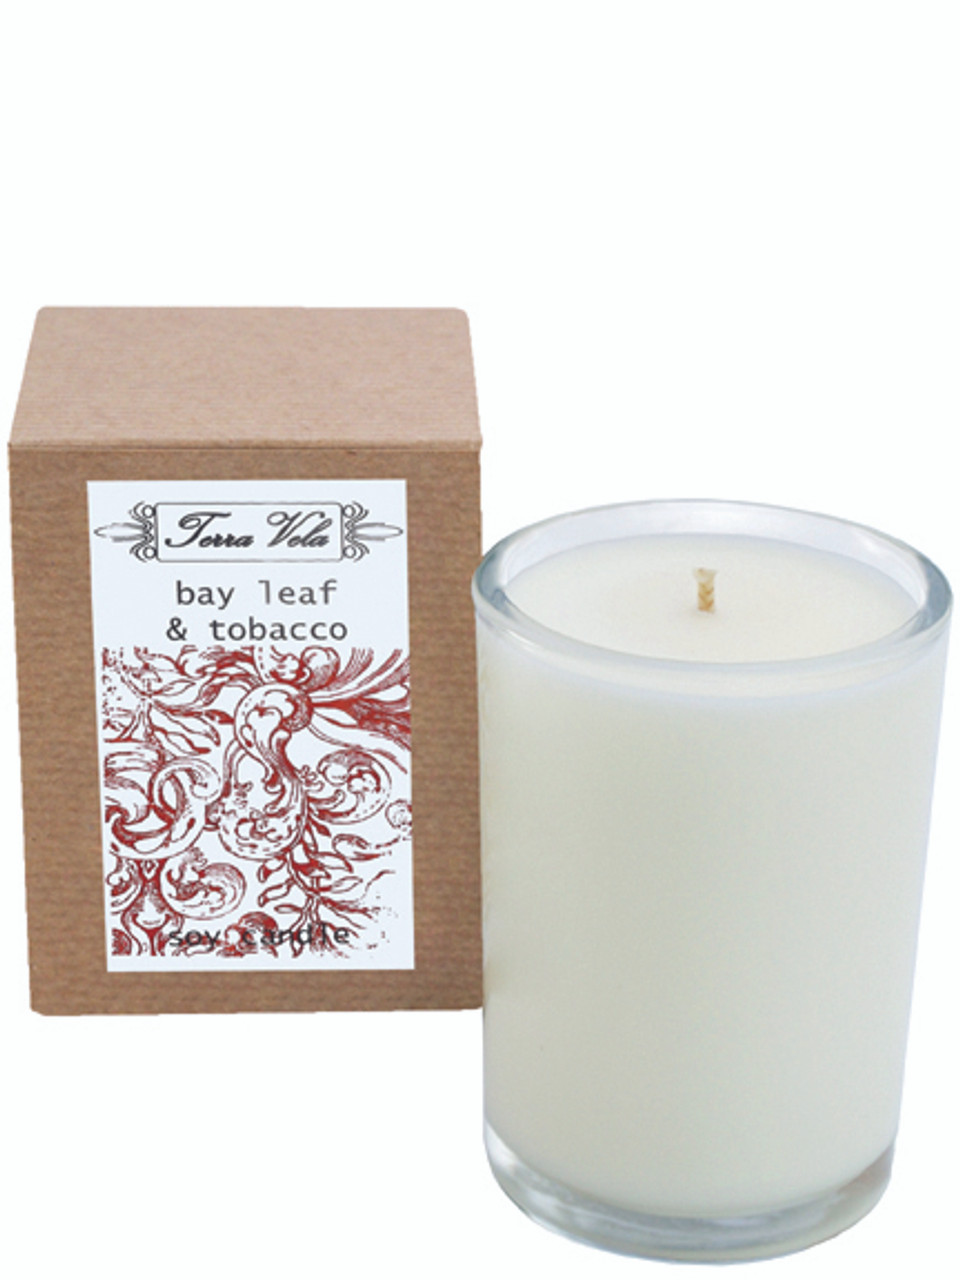 Tobacco and Bay Leaf Essential Oil - 8oz Soy Wax Candle – Little